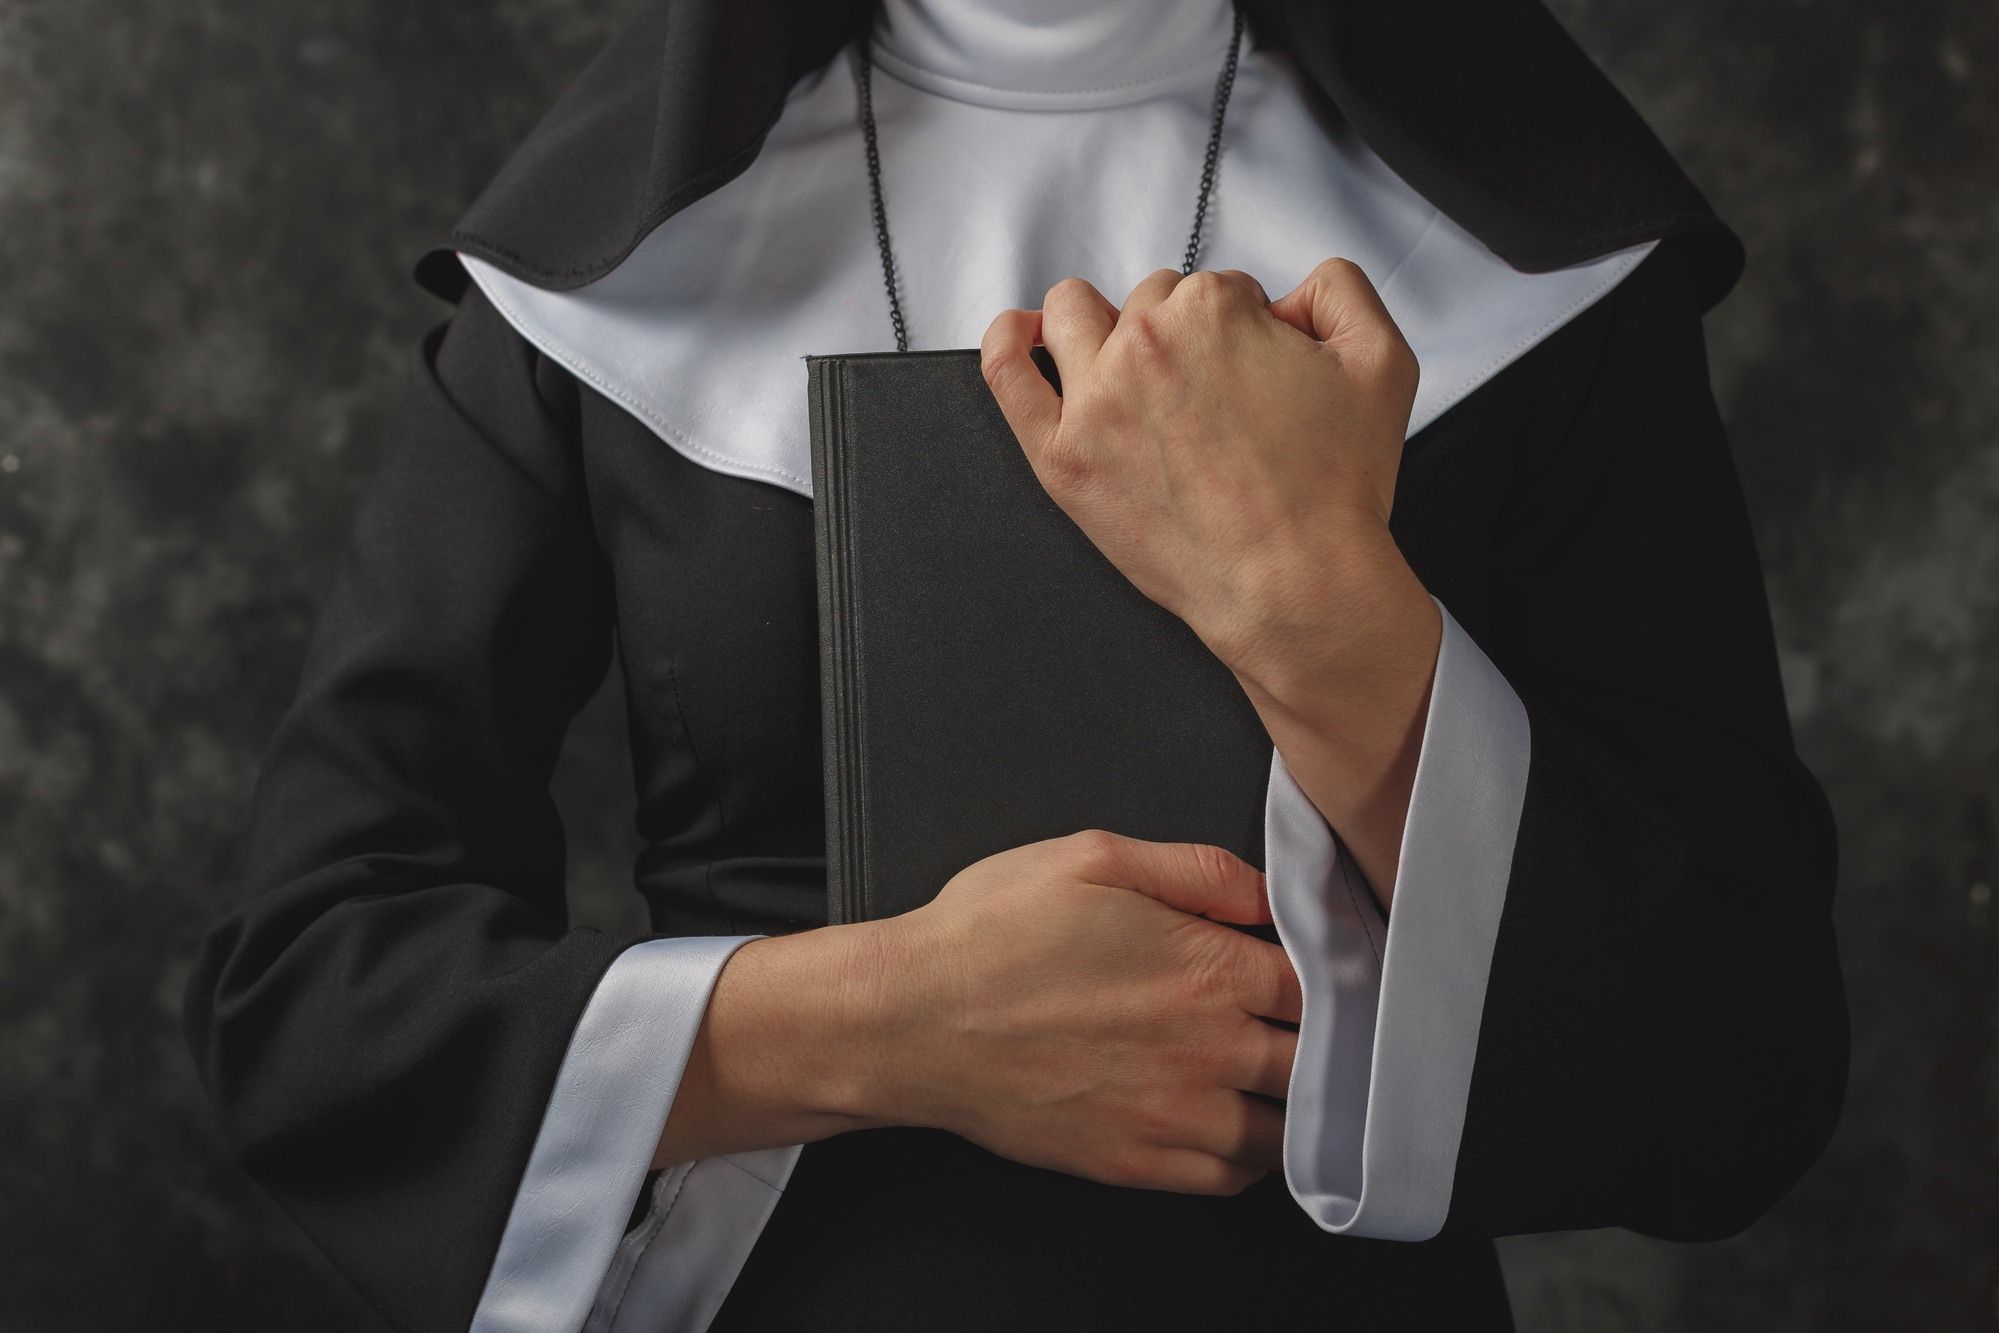 Nun regarding the orphanage abuse class action lawsuit filed